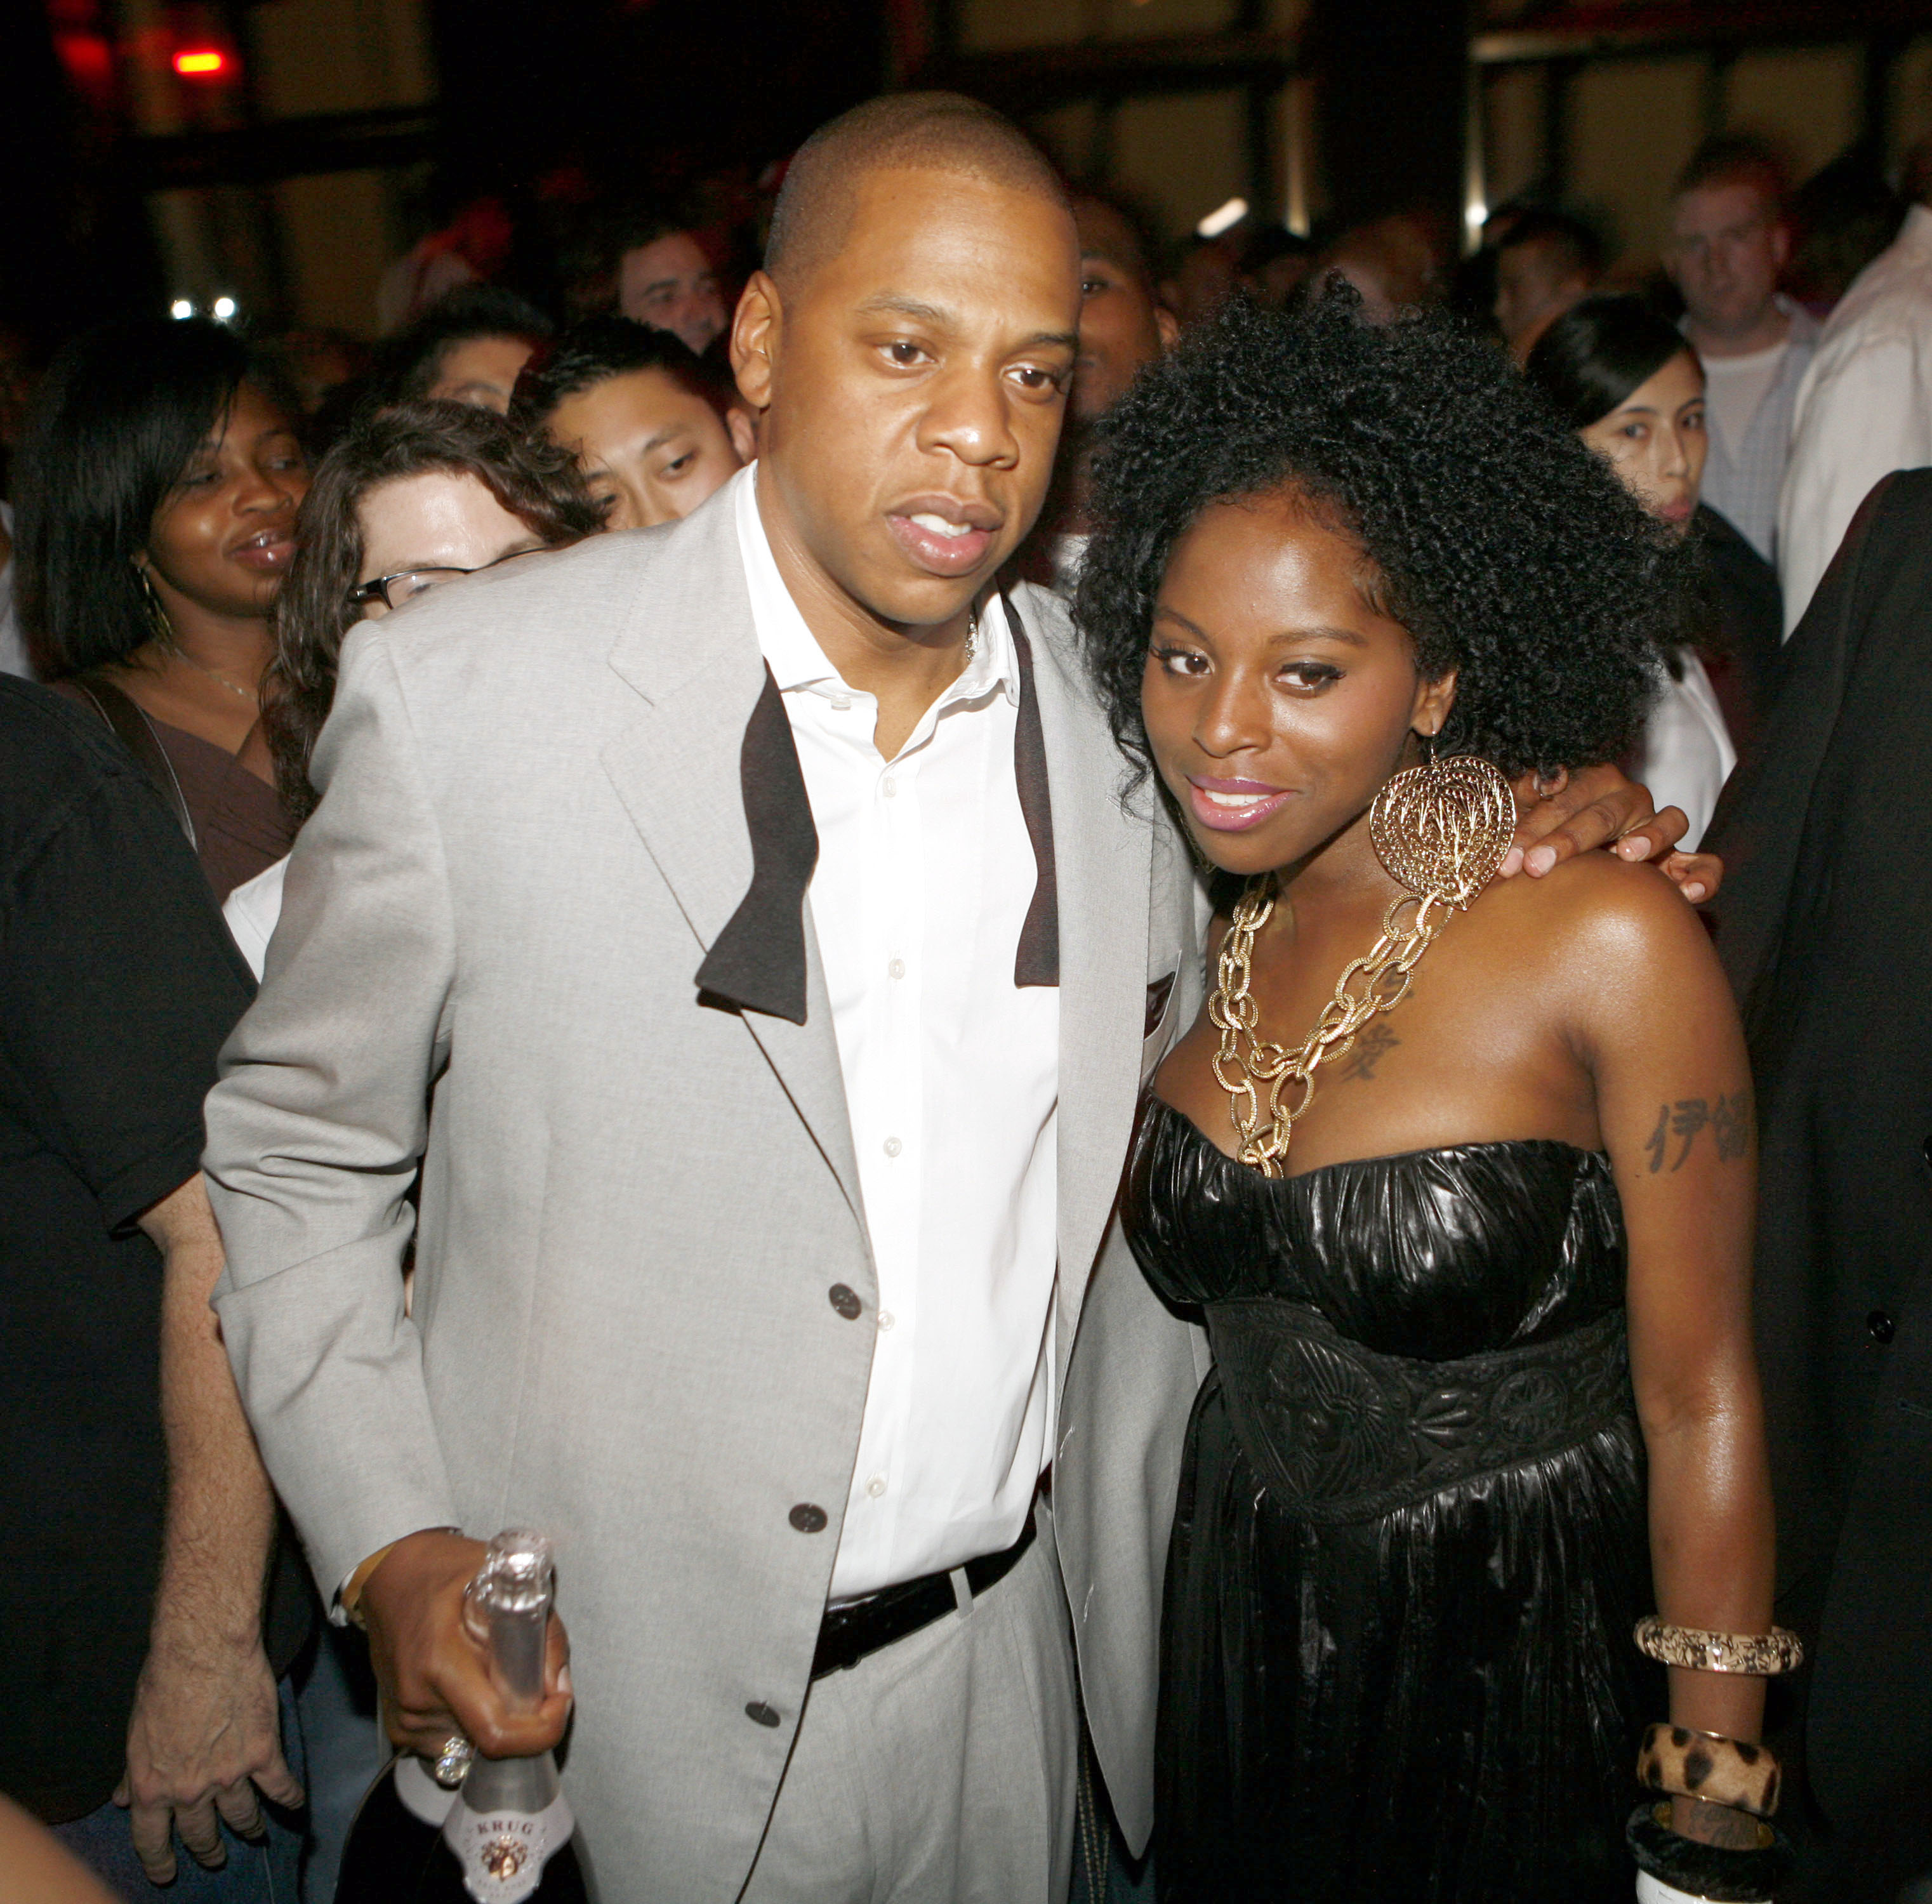 Jay-Z Celebrates the 10th Anniversary of "Reasonable Doubt" - Inside